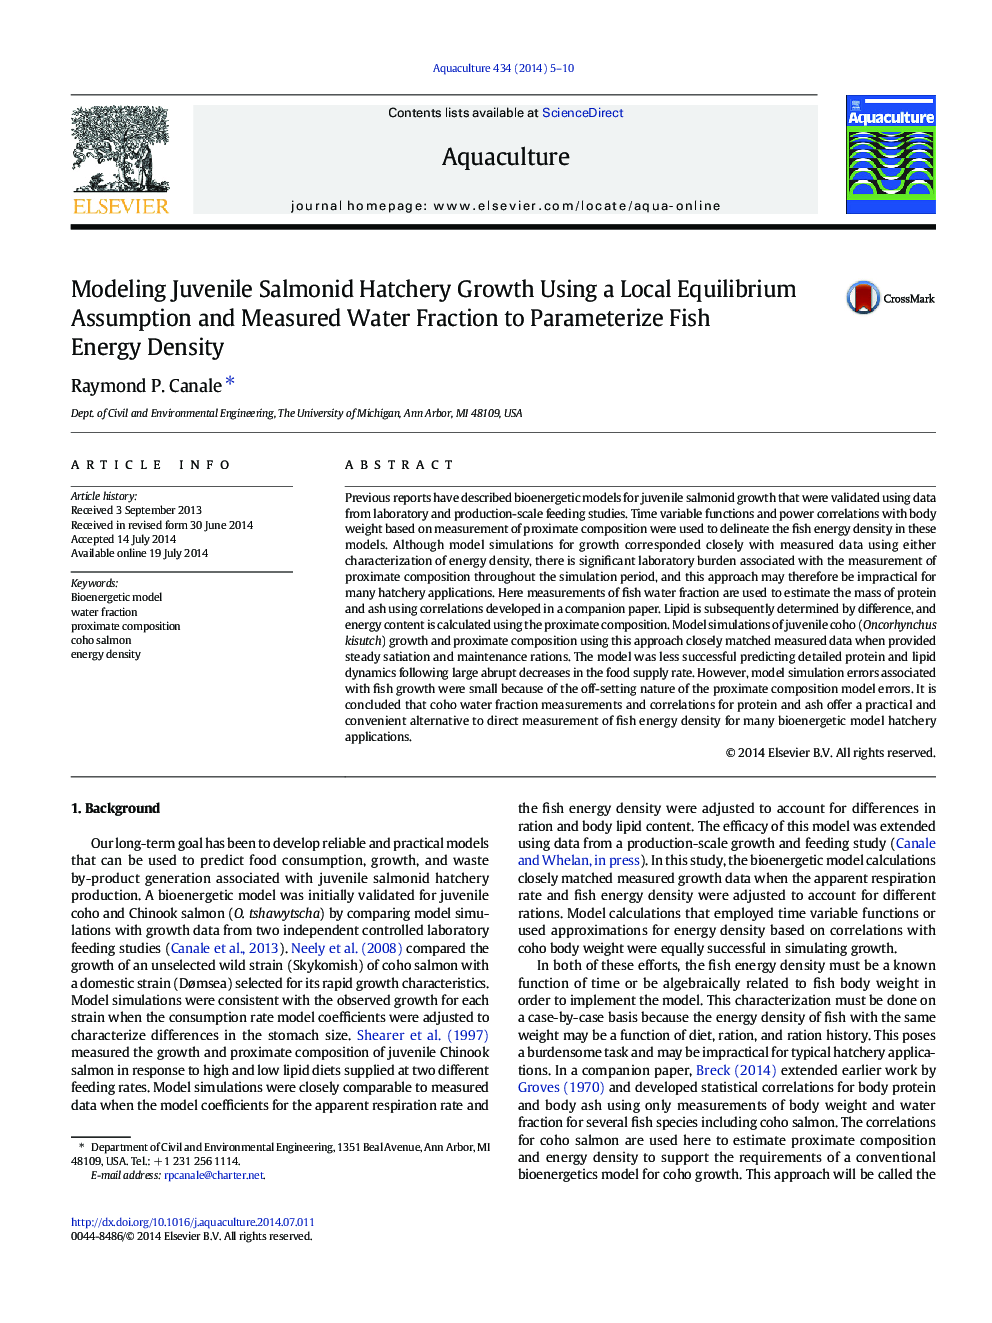 Modeling Juvenile Salmonid Hatchery Growth Using a Local Equilibrium Assumption and Measured Water Fraction to Parameterize Fish Energy Density